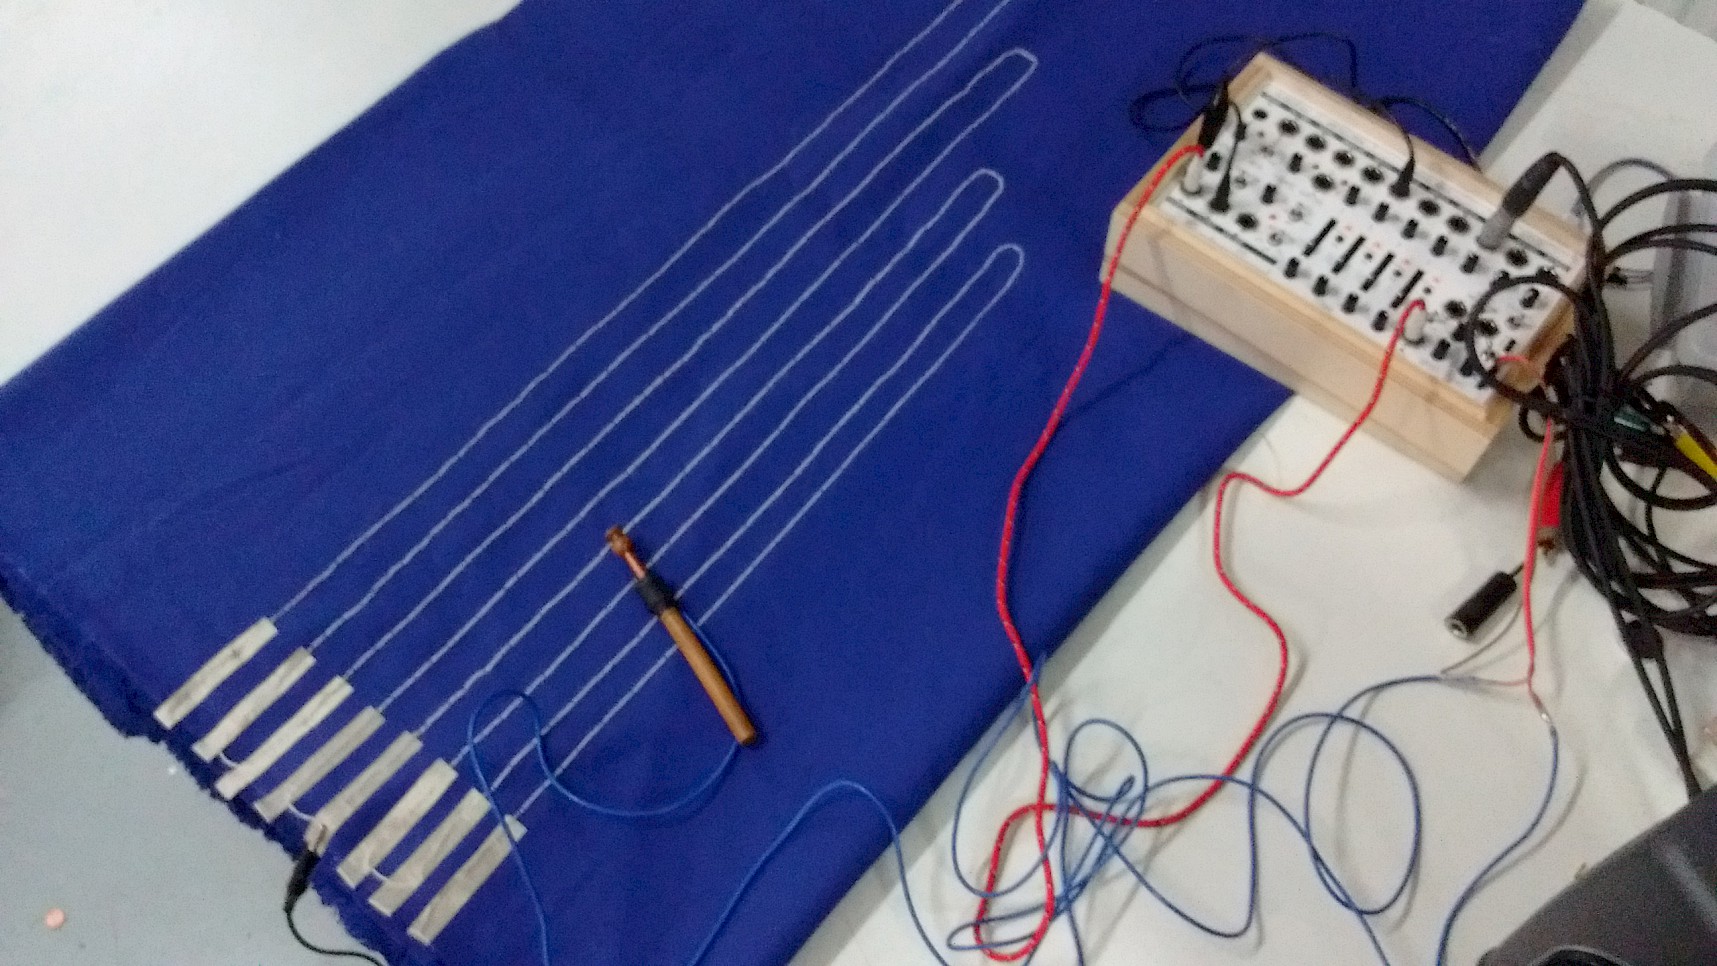 Making a textile tunner with KOMA Field Kit and electronic textiles